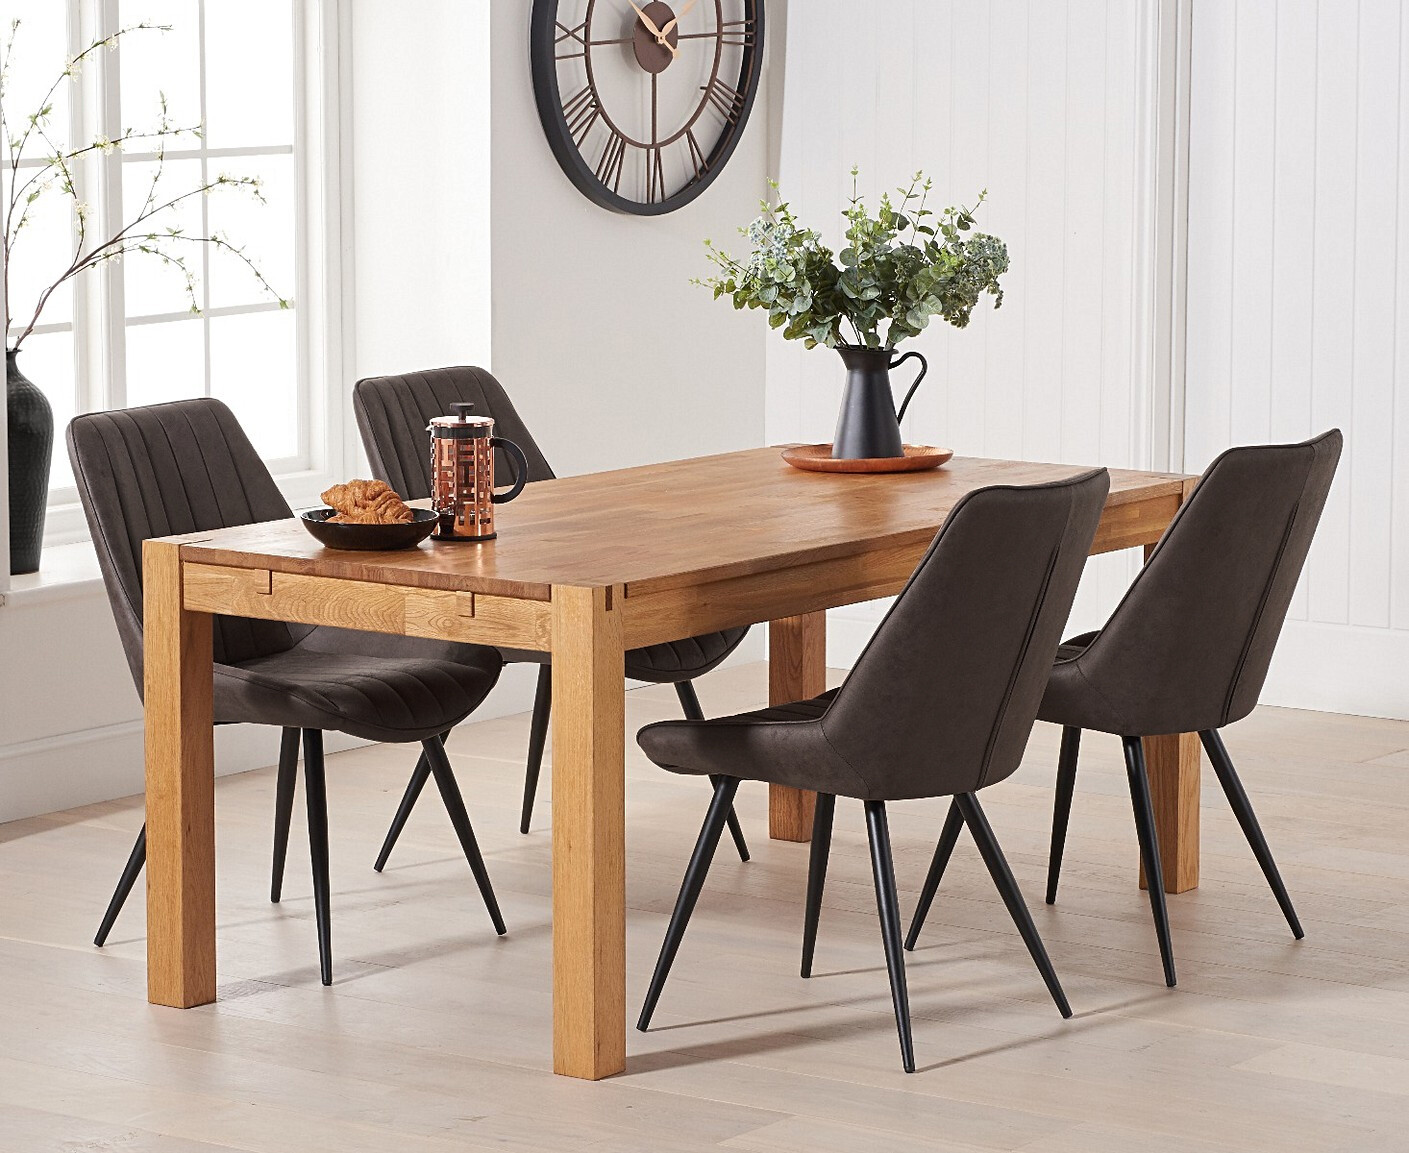 Photo 2 of Thetford 180cm oak dining table with 8 mink brody chairs